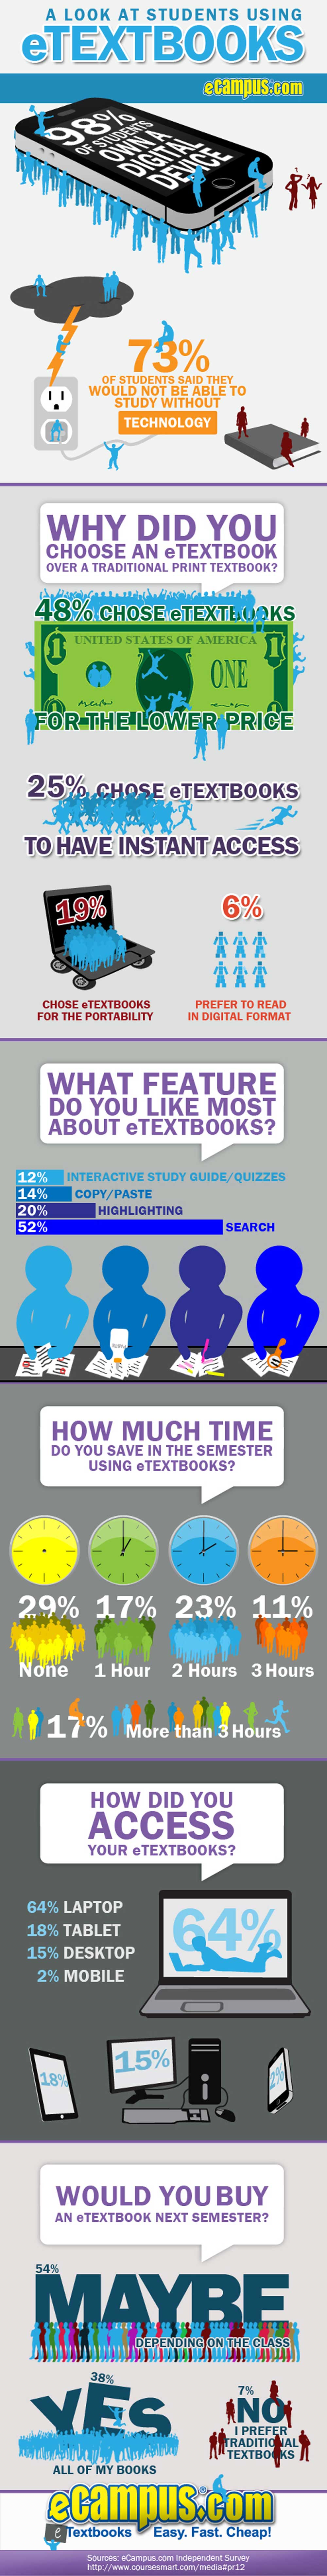 E-Textbooks Versus Print Books: Will the Traditional Book Survive?